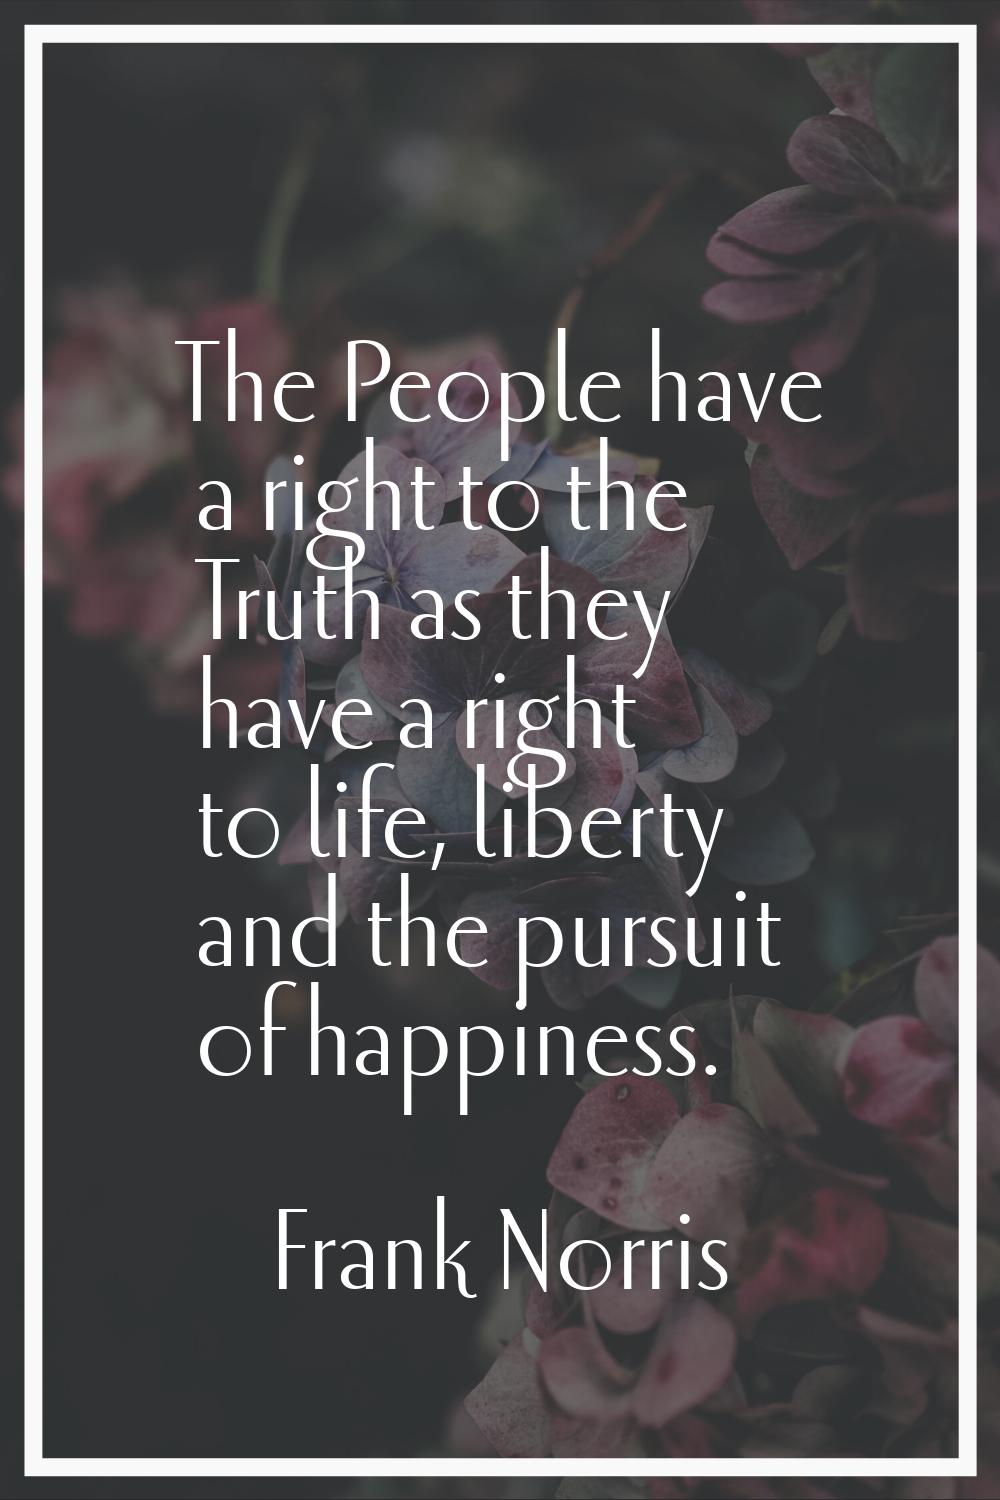 The People have a right to the Truth as they have a right to life, liberty and the pursuit of happi